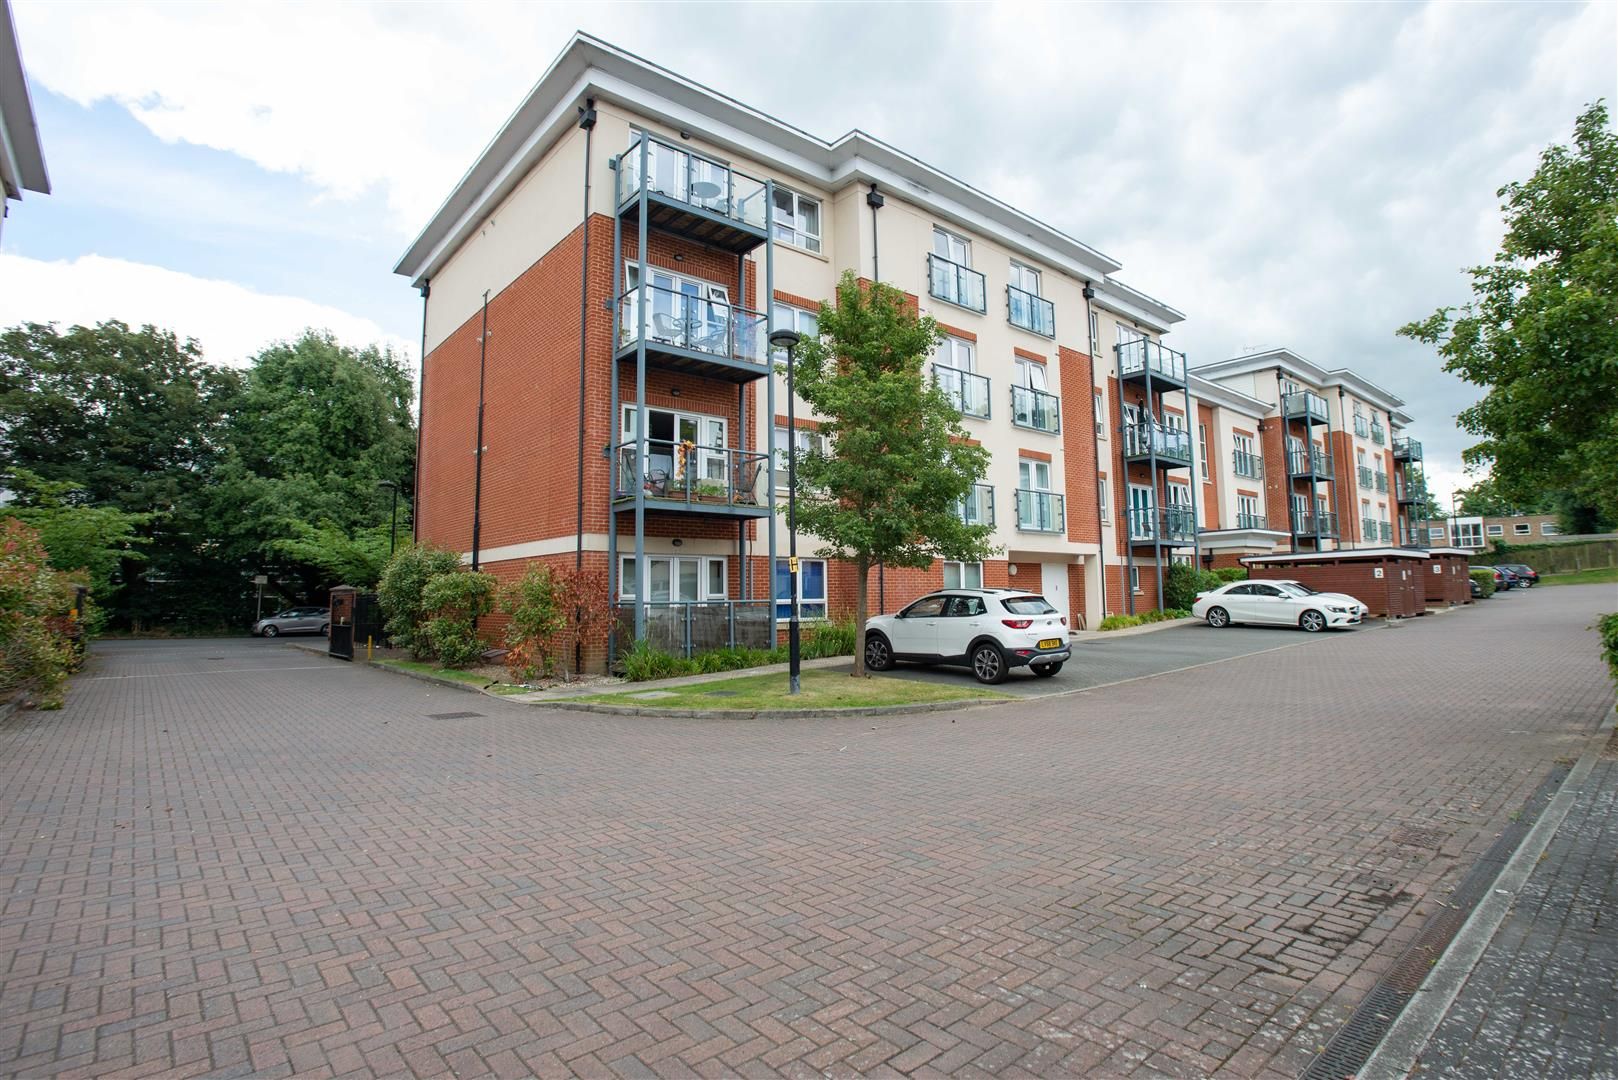 Bramley Court, Orchard Grove, Orpington, Kent, BR6 0AT